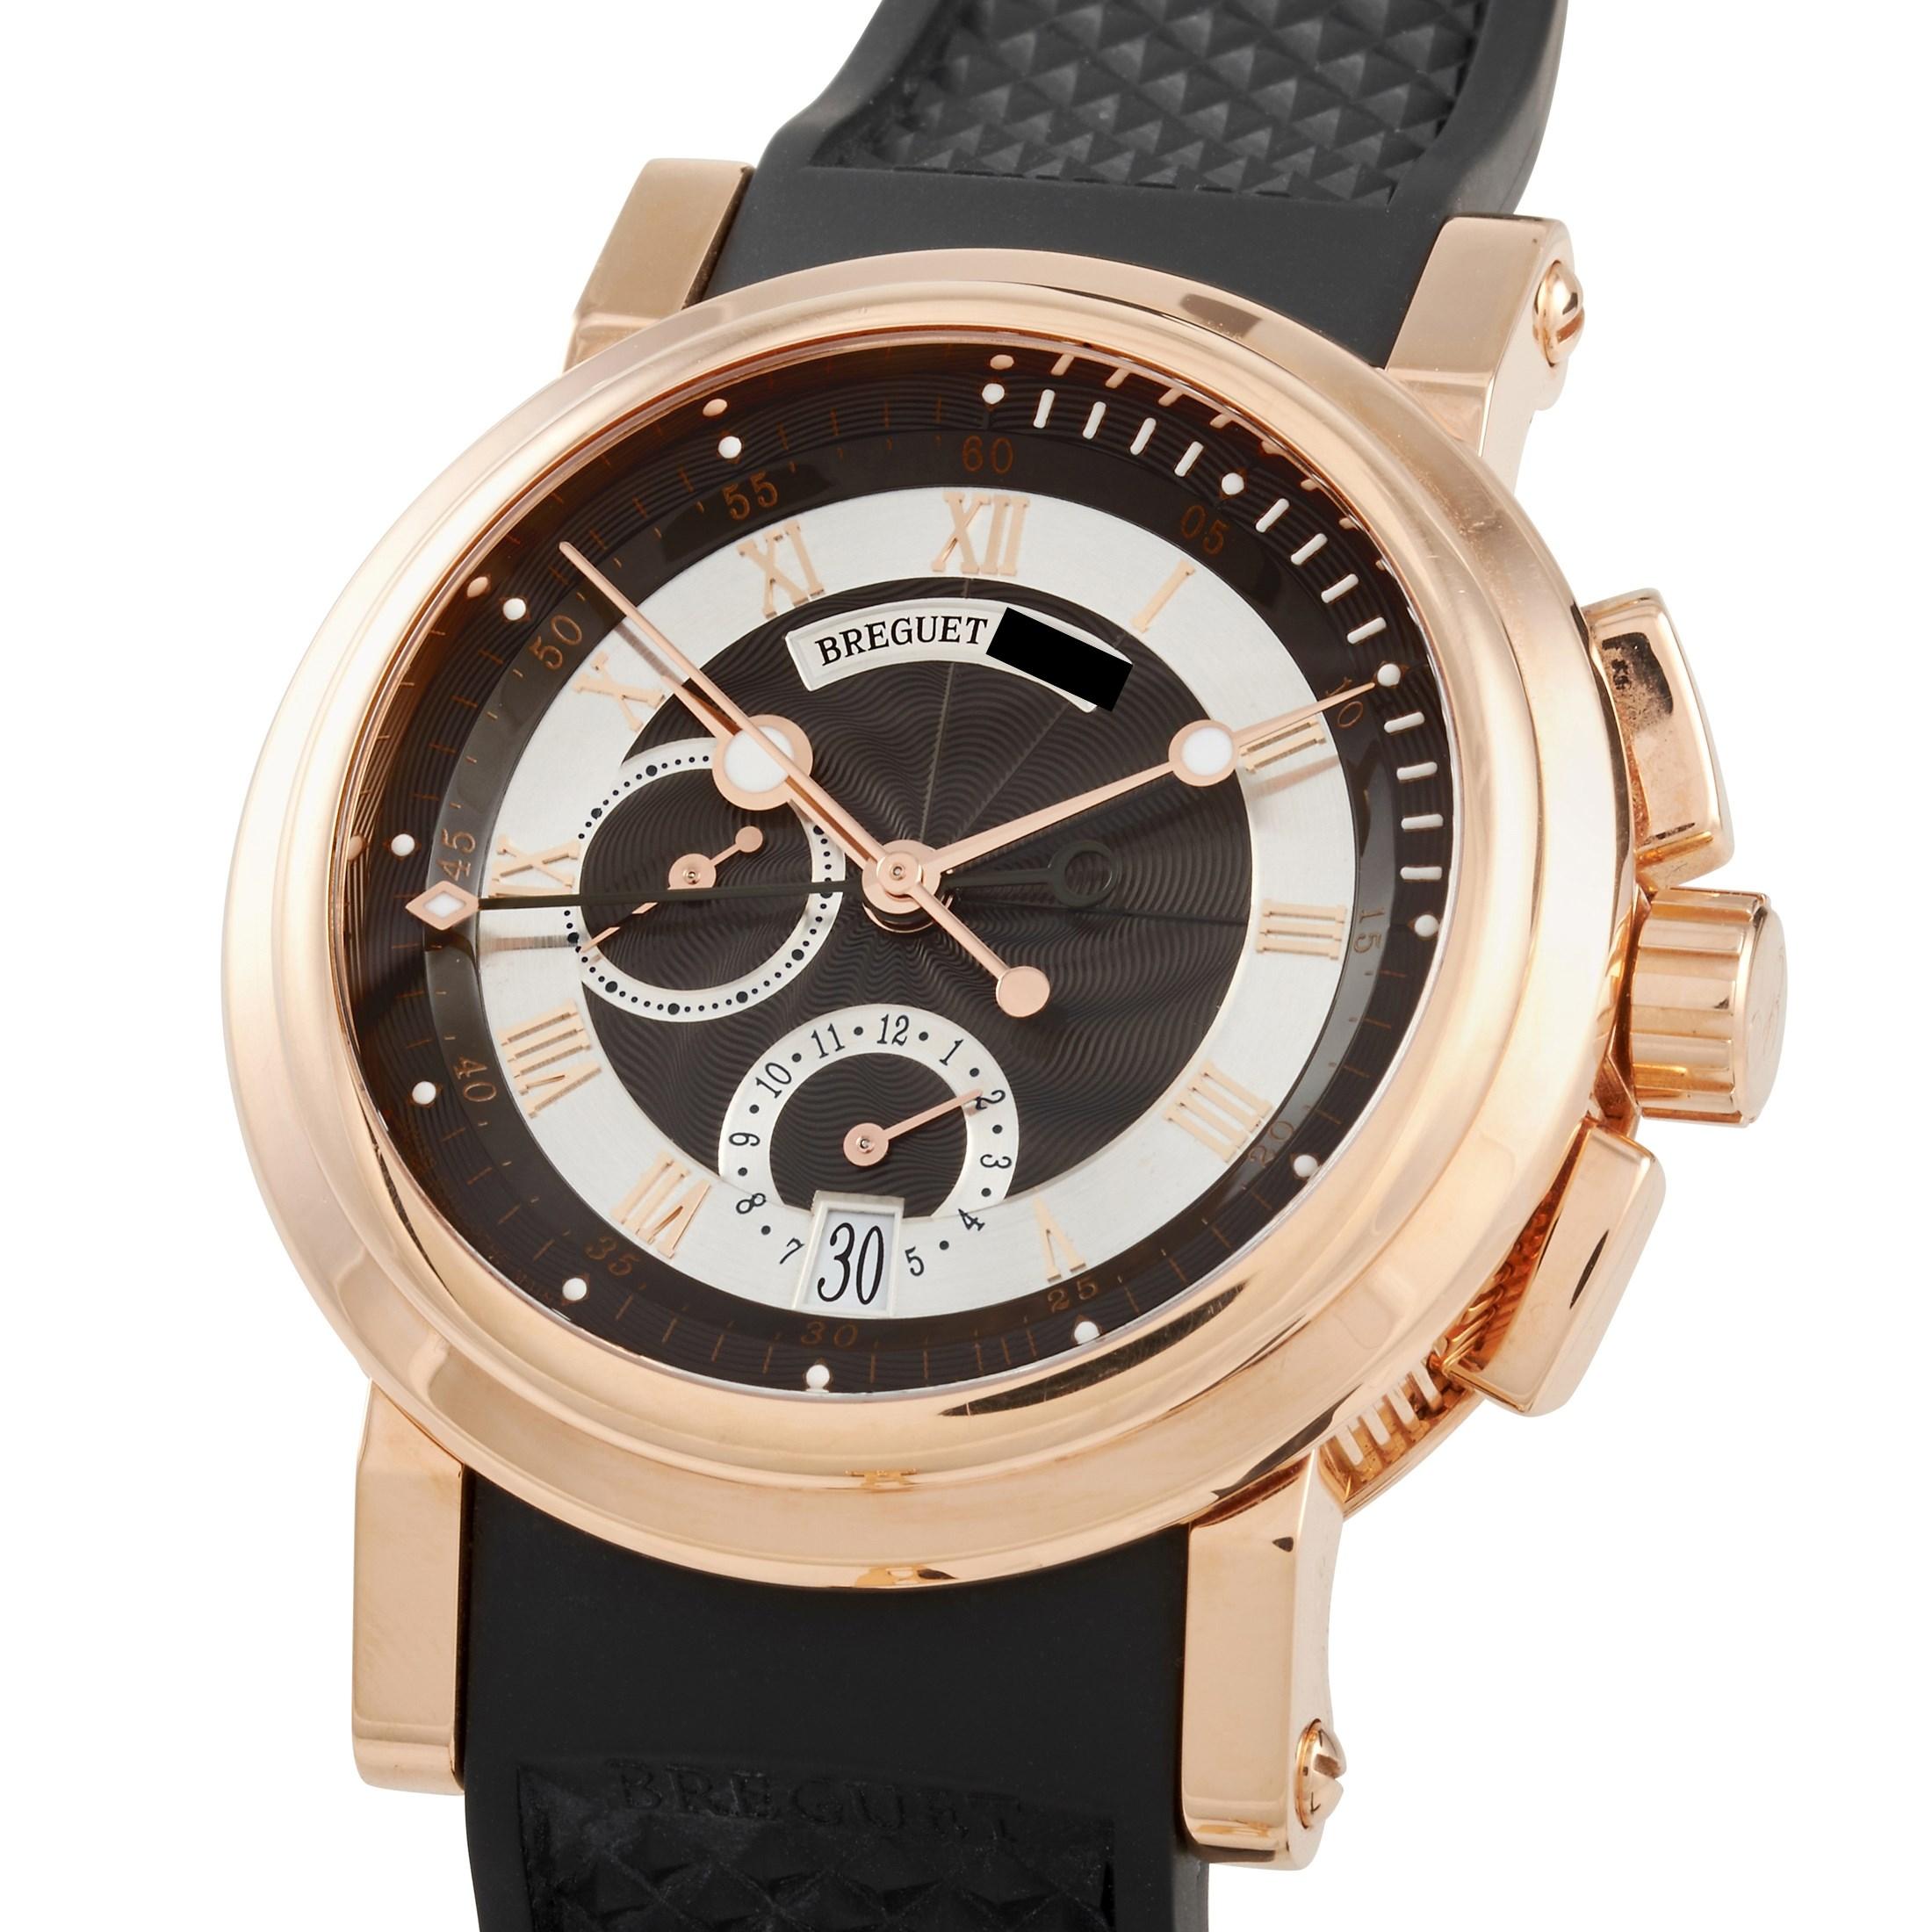 The Breguet Marine Chronograph Watch, reference number 5827BRZ29Z8, is a dynamic timepiece with obvious elegance. A delightful pairing of 18K Rose Gold and black gives this watch a bold, sophisticated sense of style that is impossible to ignore. 

A